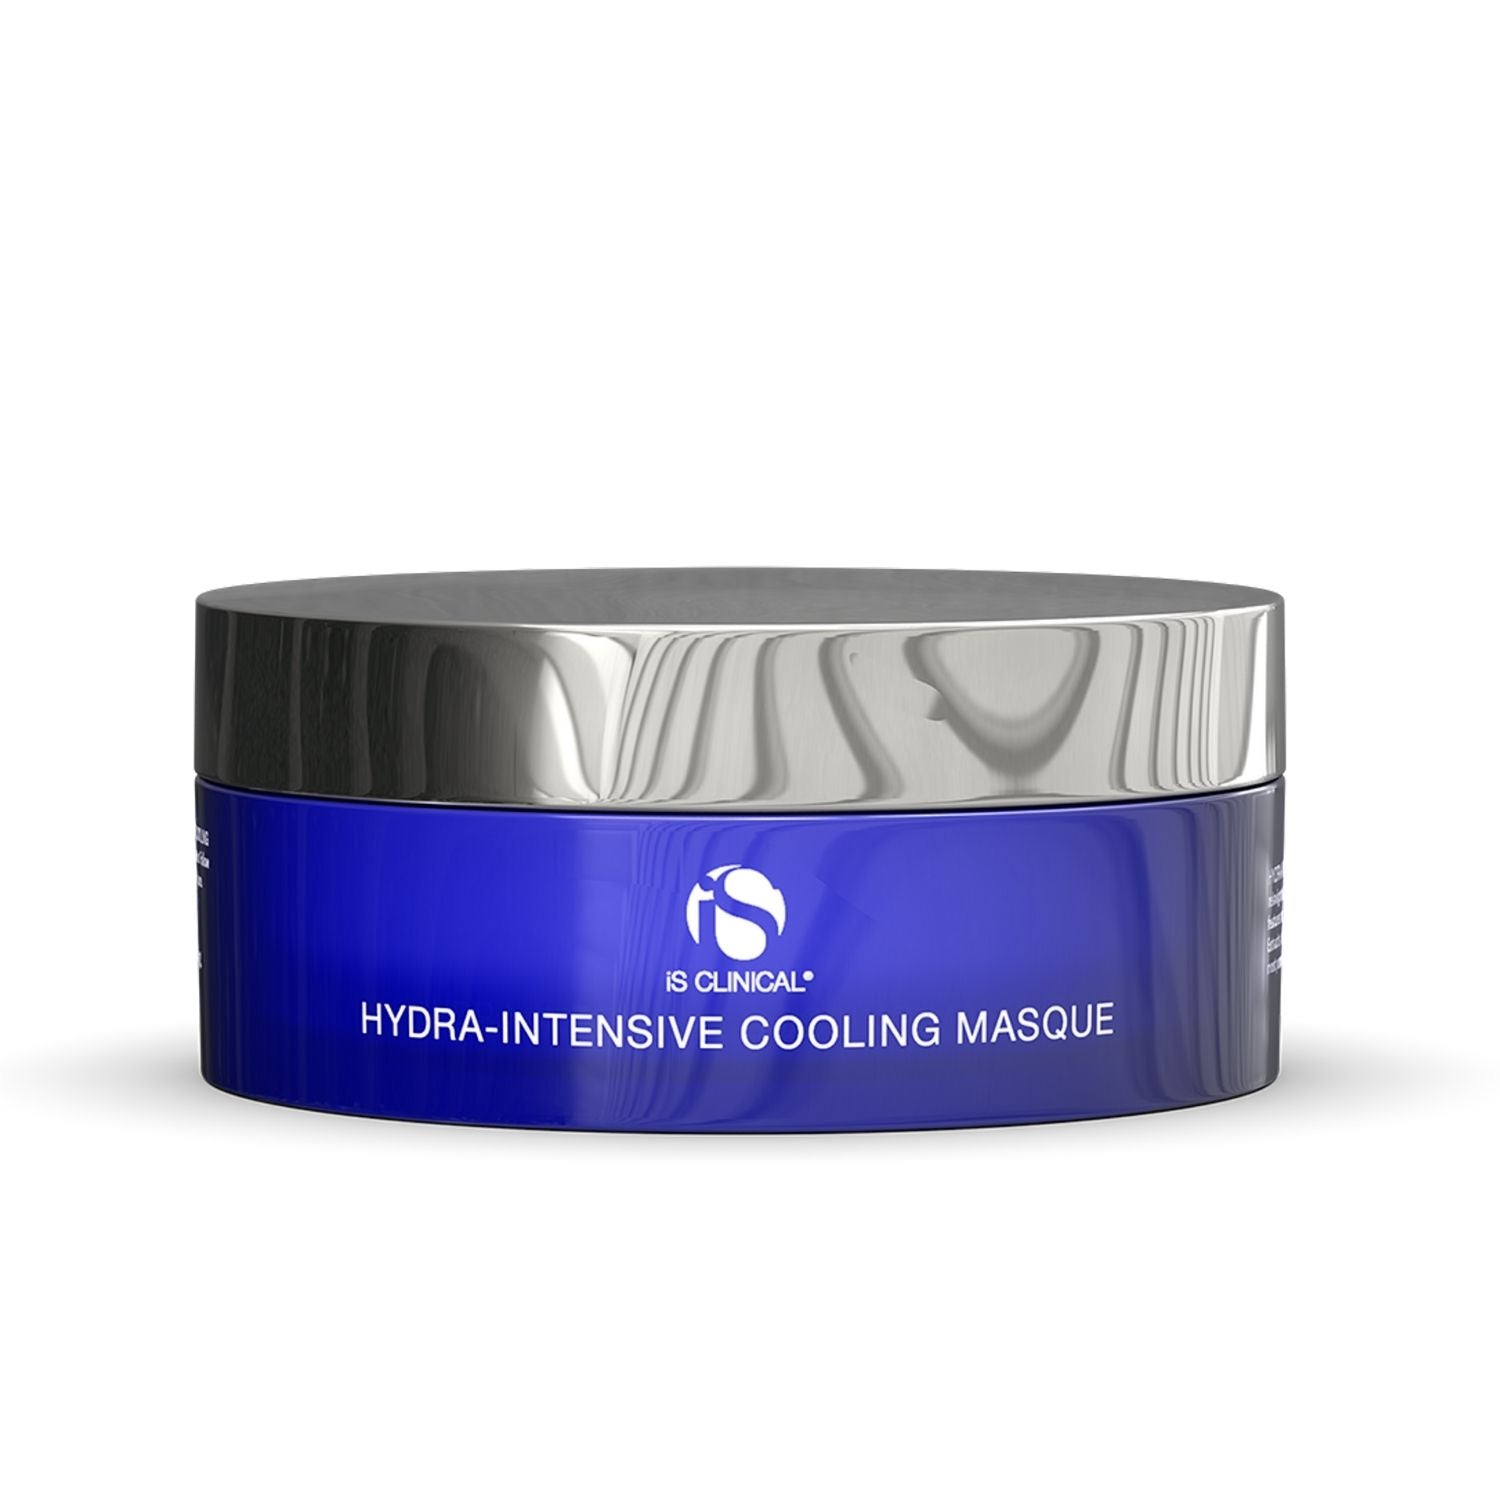 iS Clinical Hydra Intensive Cooling Masque - Dr. Pen Store - iS Clinical Buy Genuine Dr Pen Products with Trust